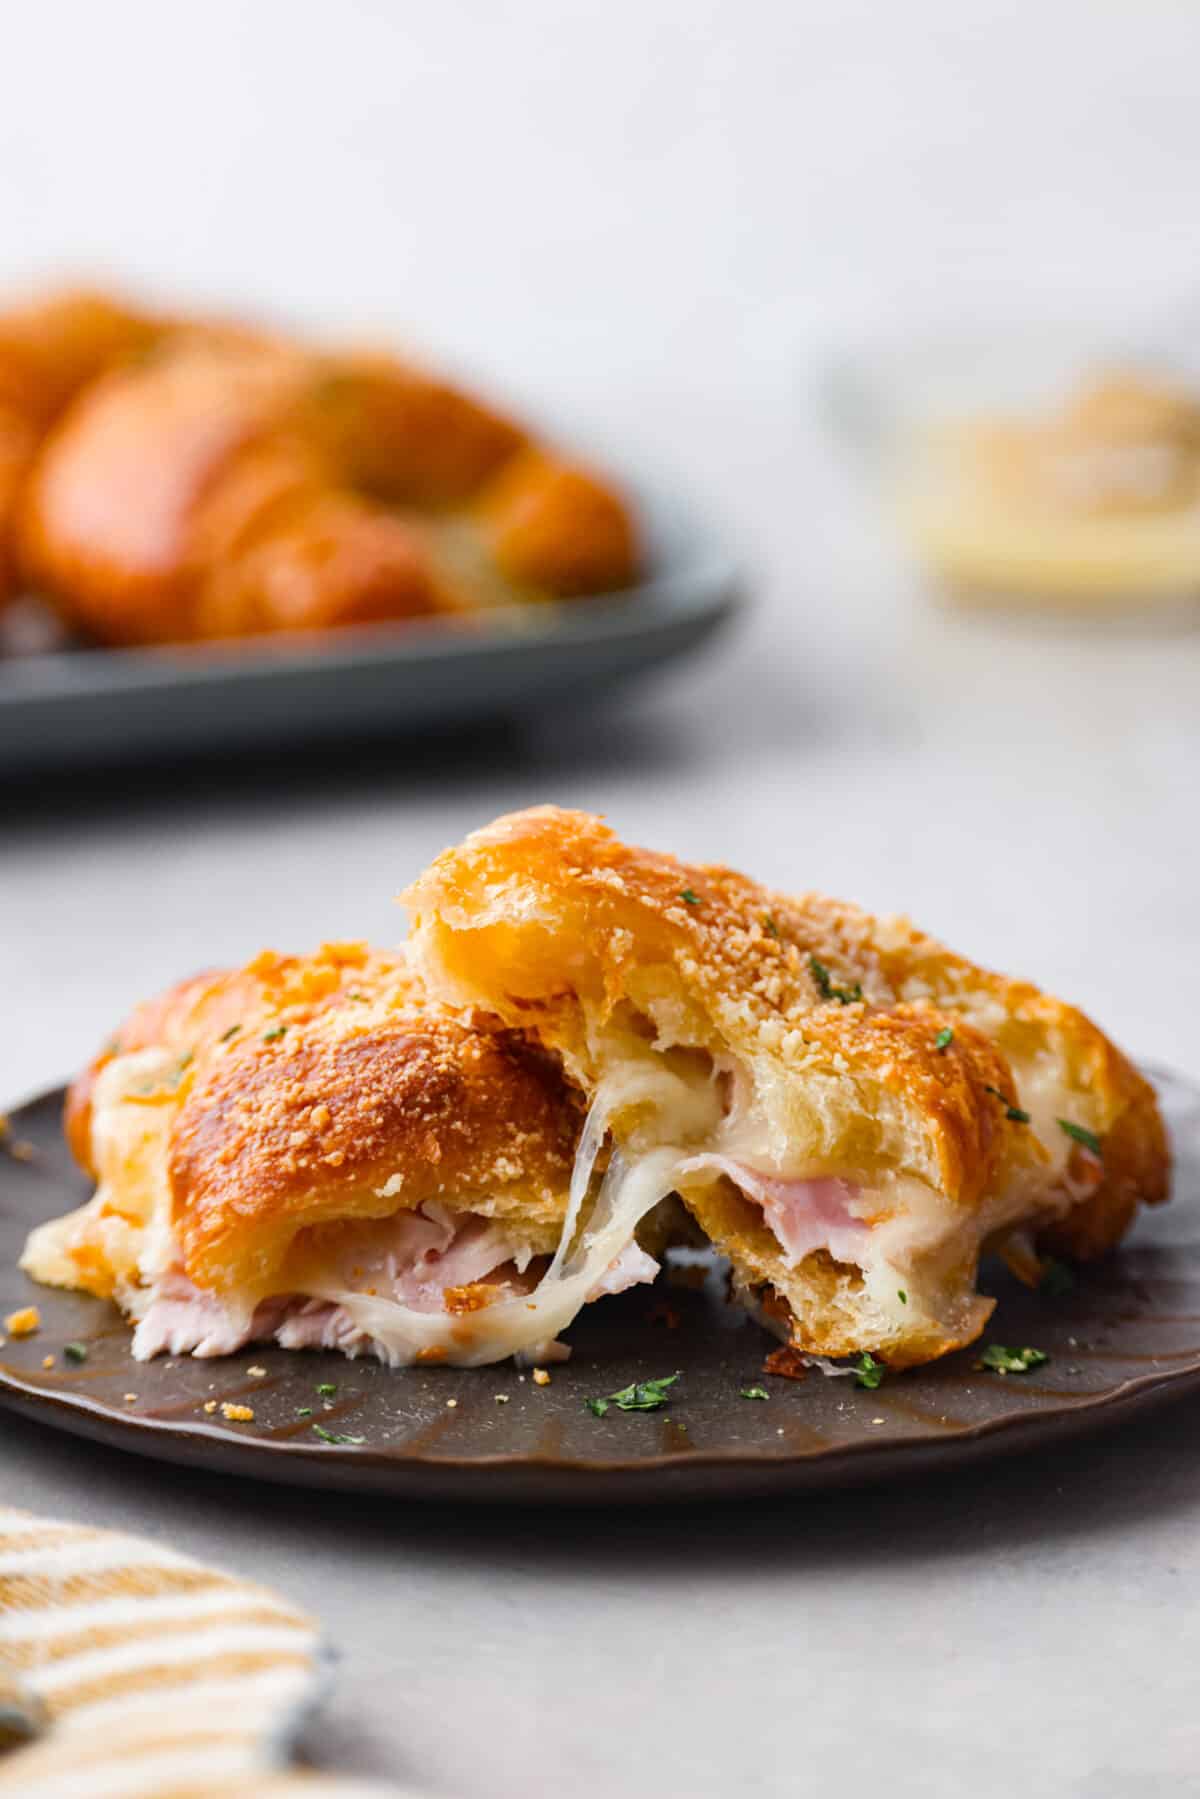 Close view of a ham and cheese croissant cut in half on a brown plate.